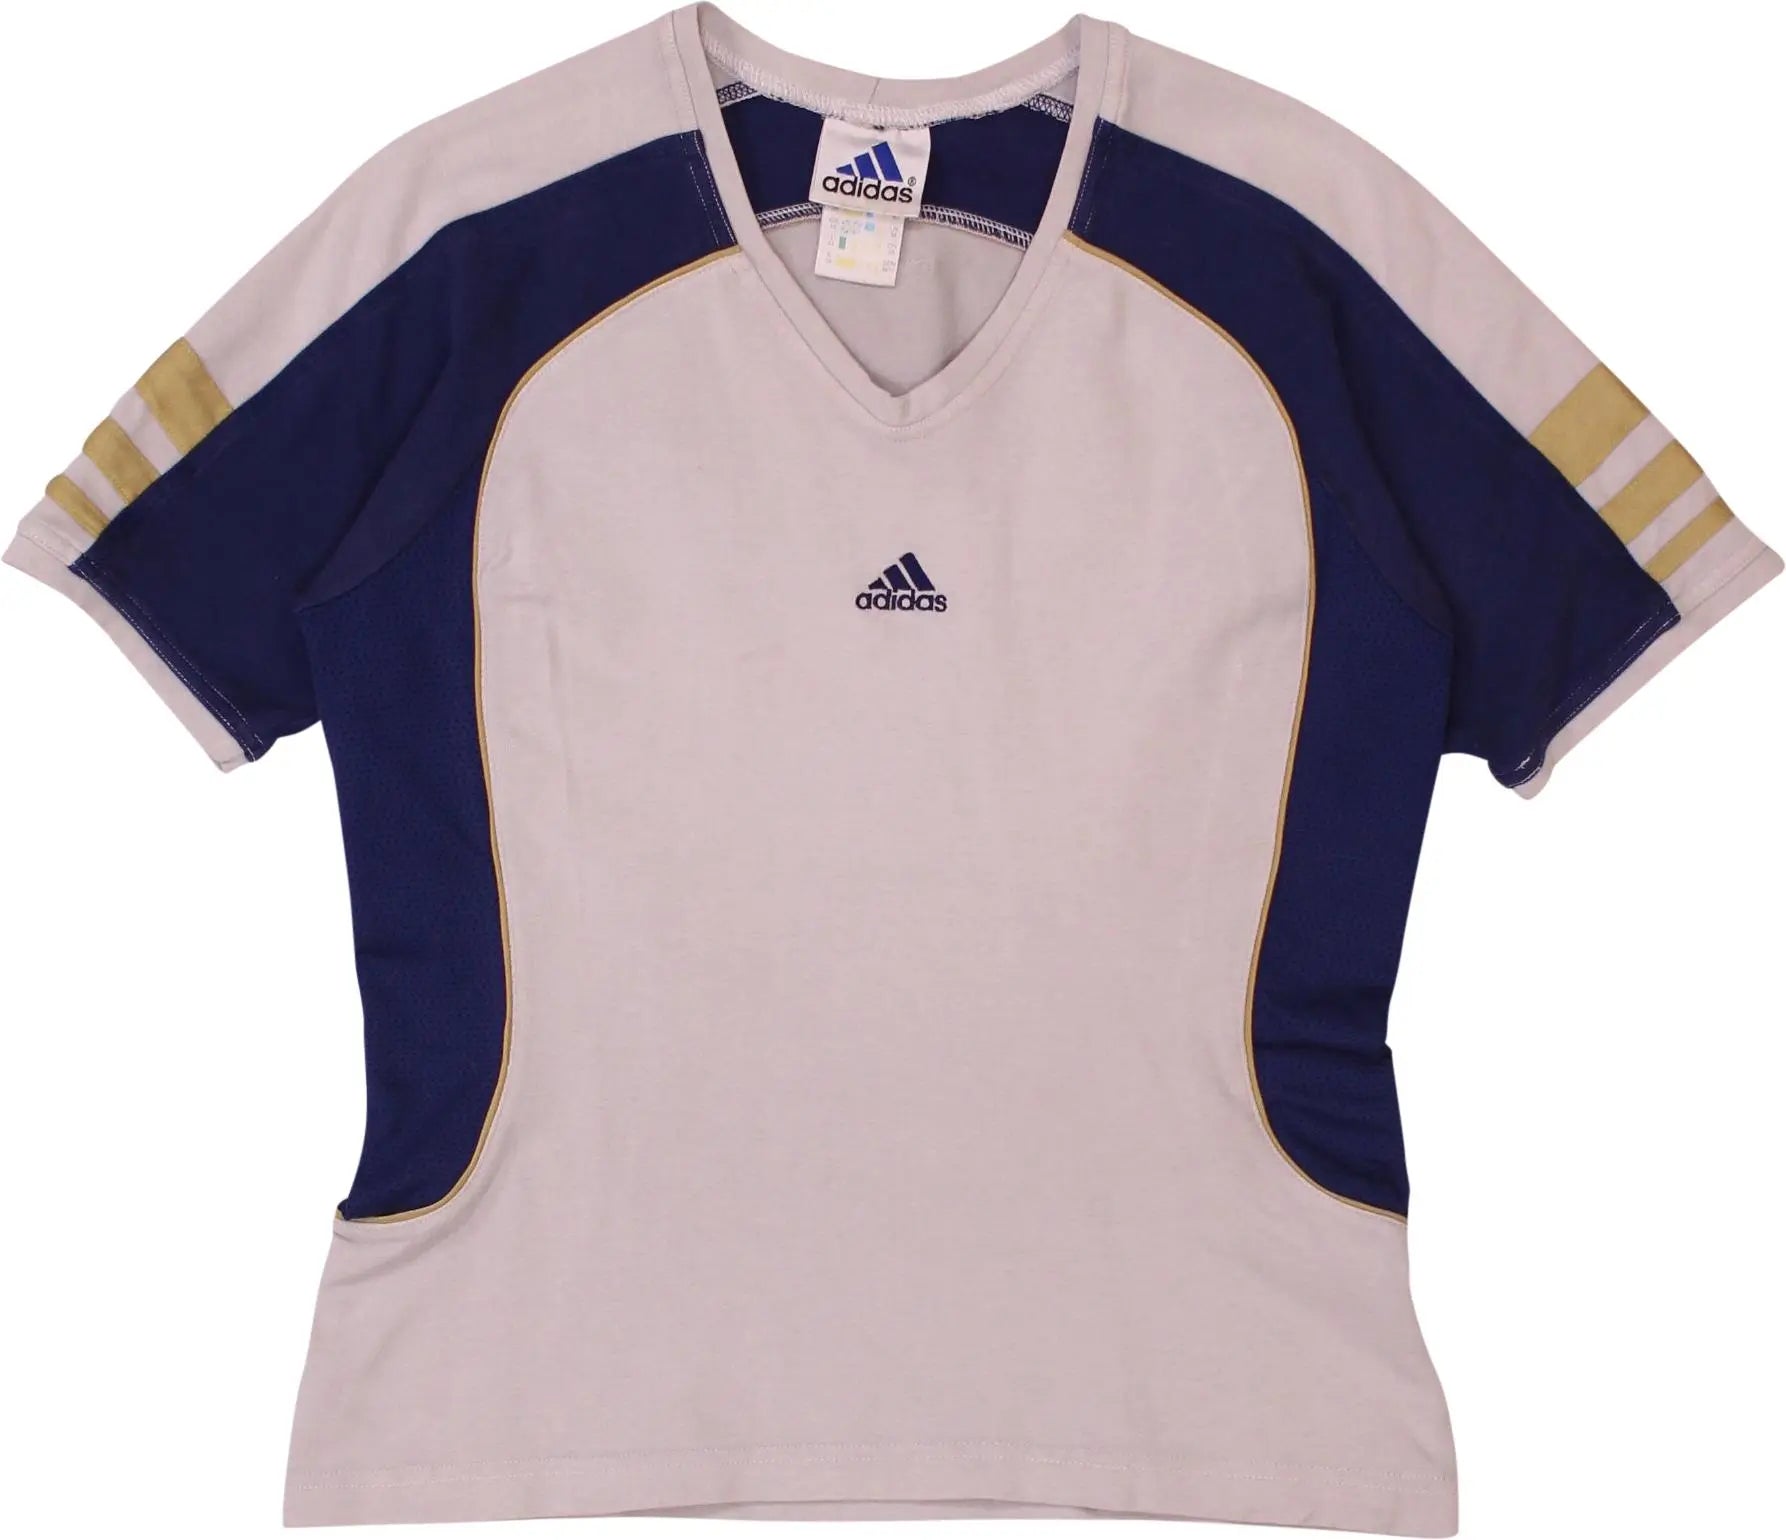 Adidas - Adidas Equipment Sport T-shirt- ThriftTale.com - Vintage and second handclothing